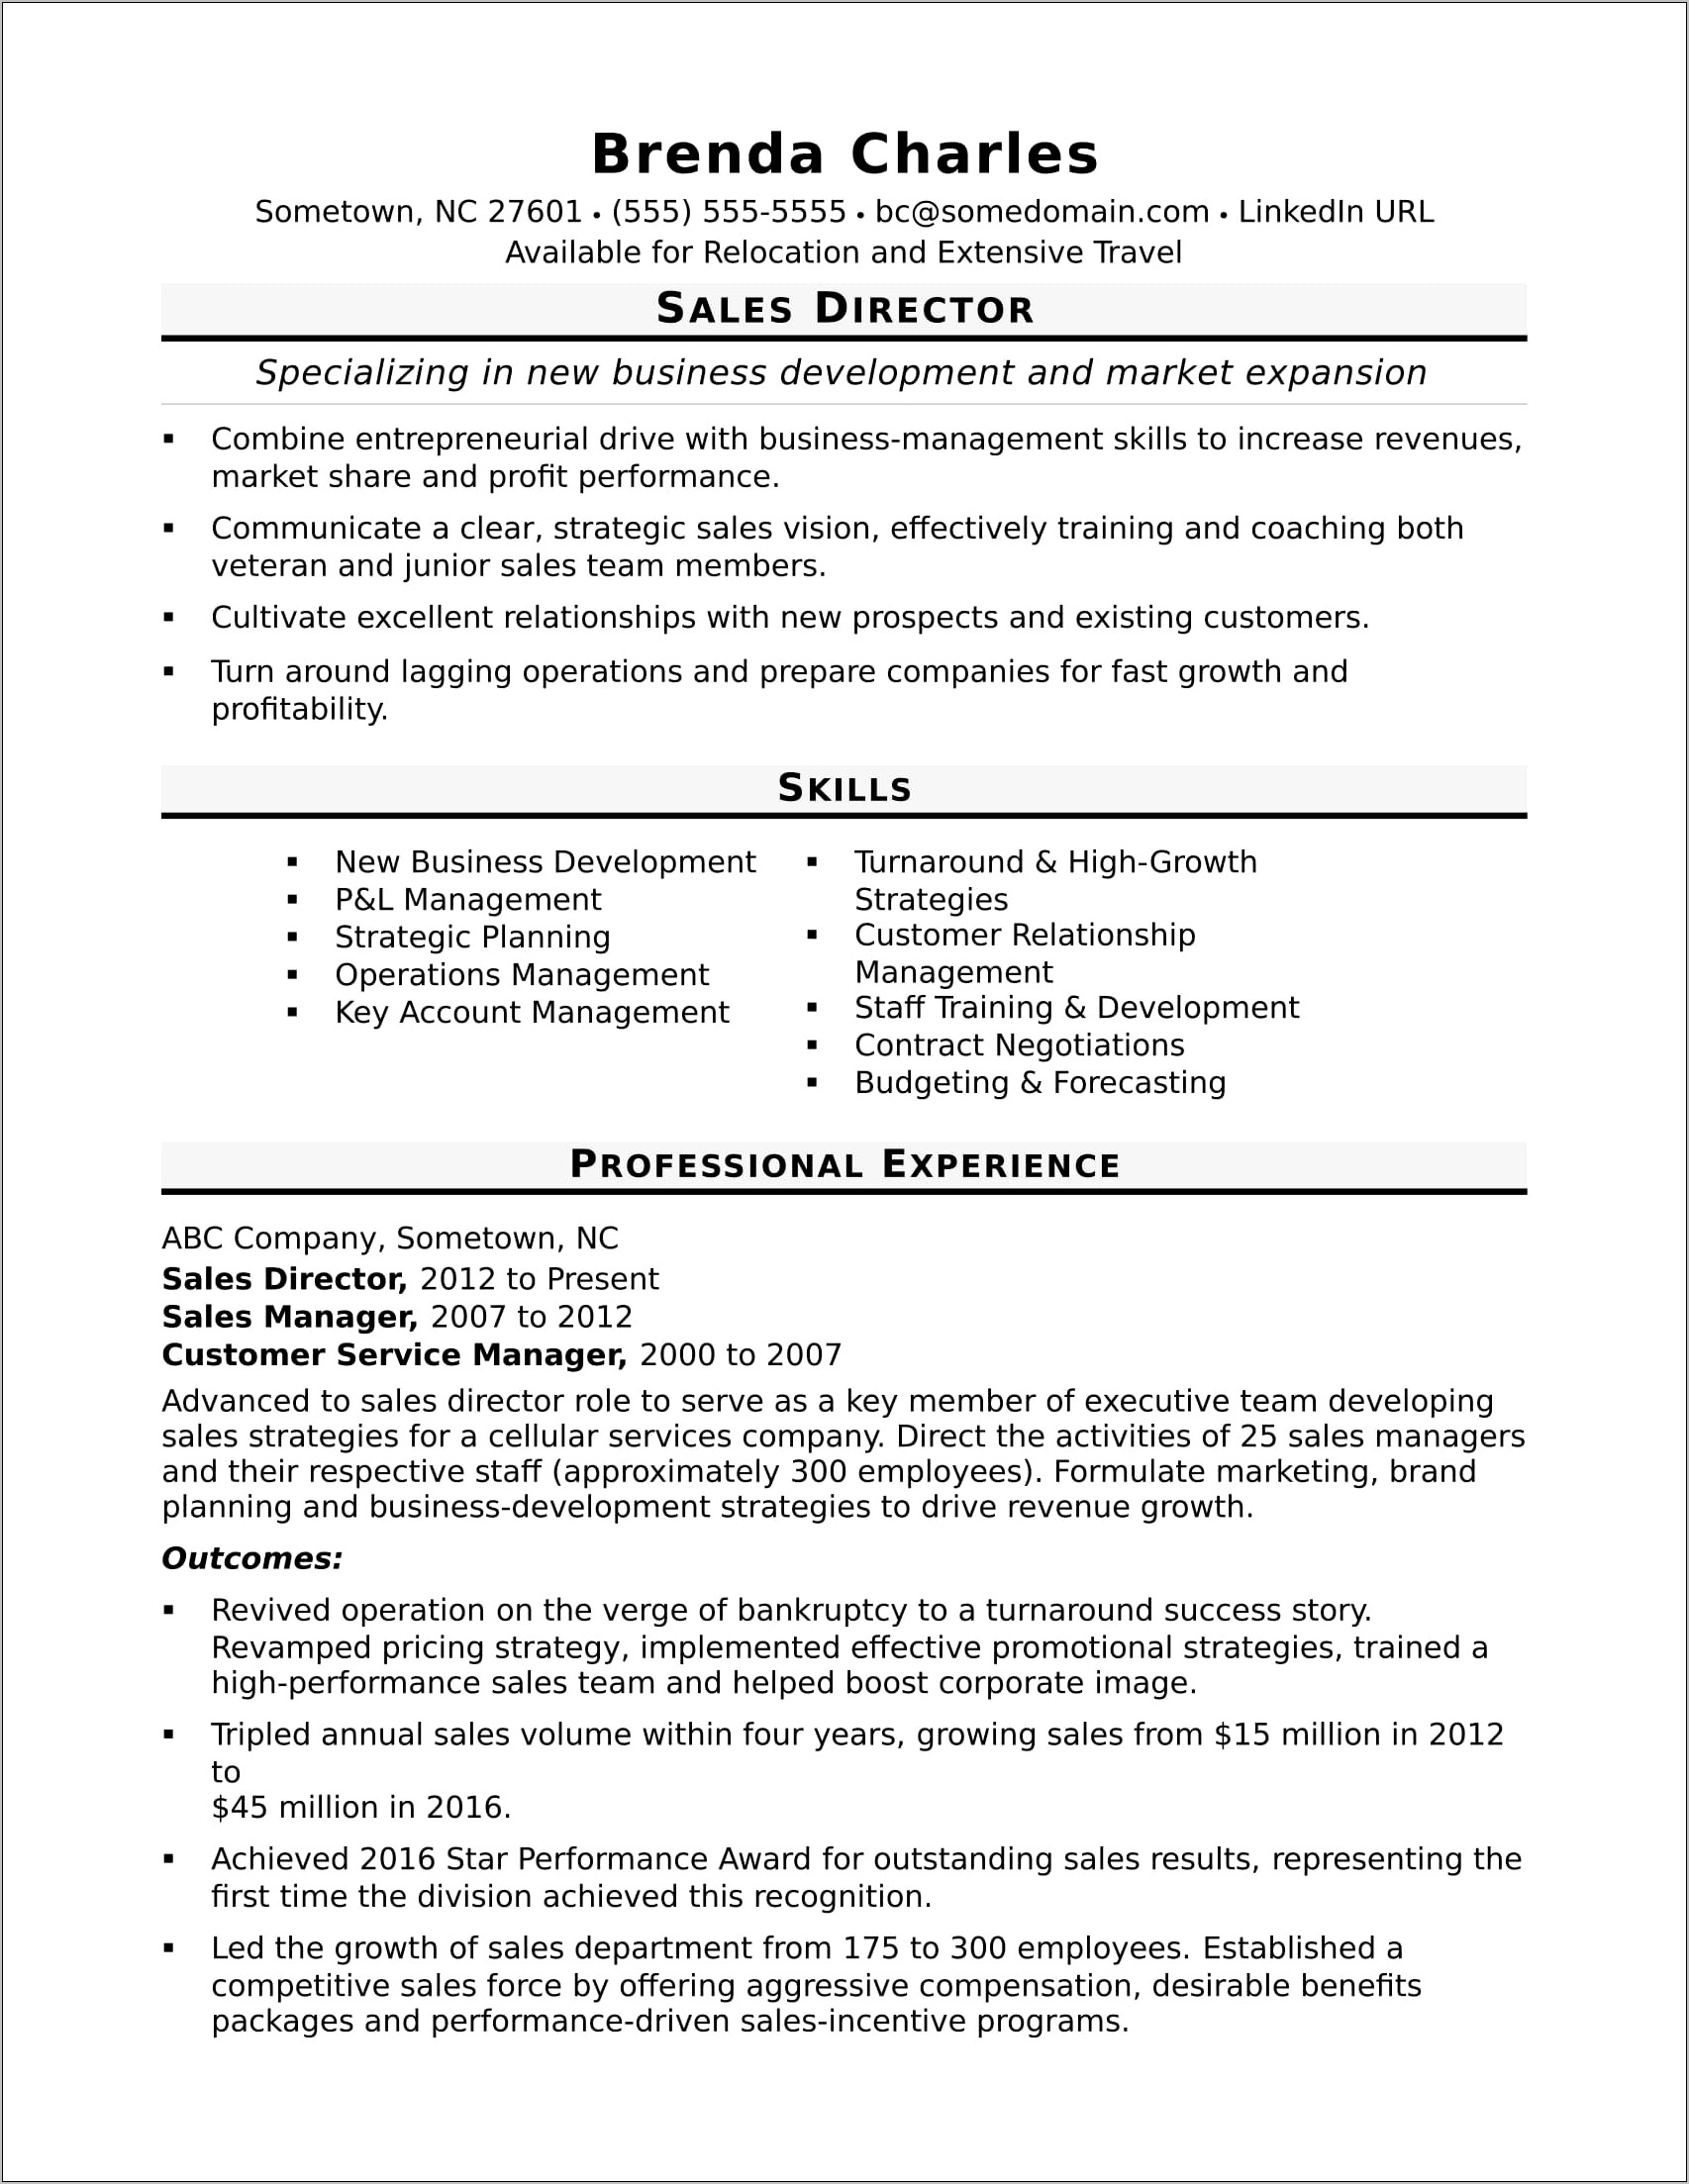 Resume For Learning And Development Manager